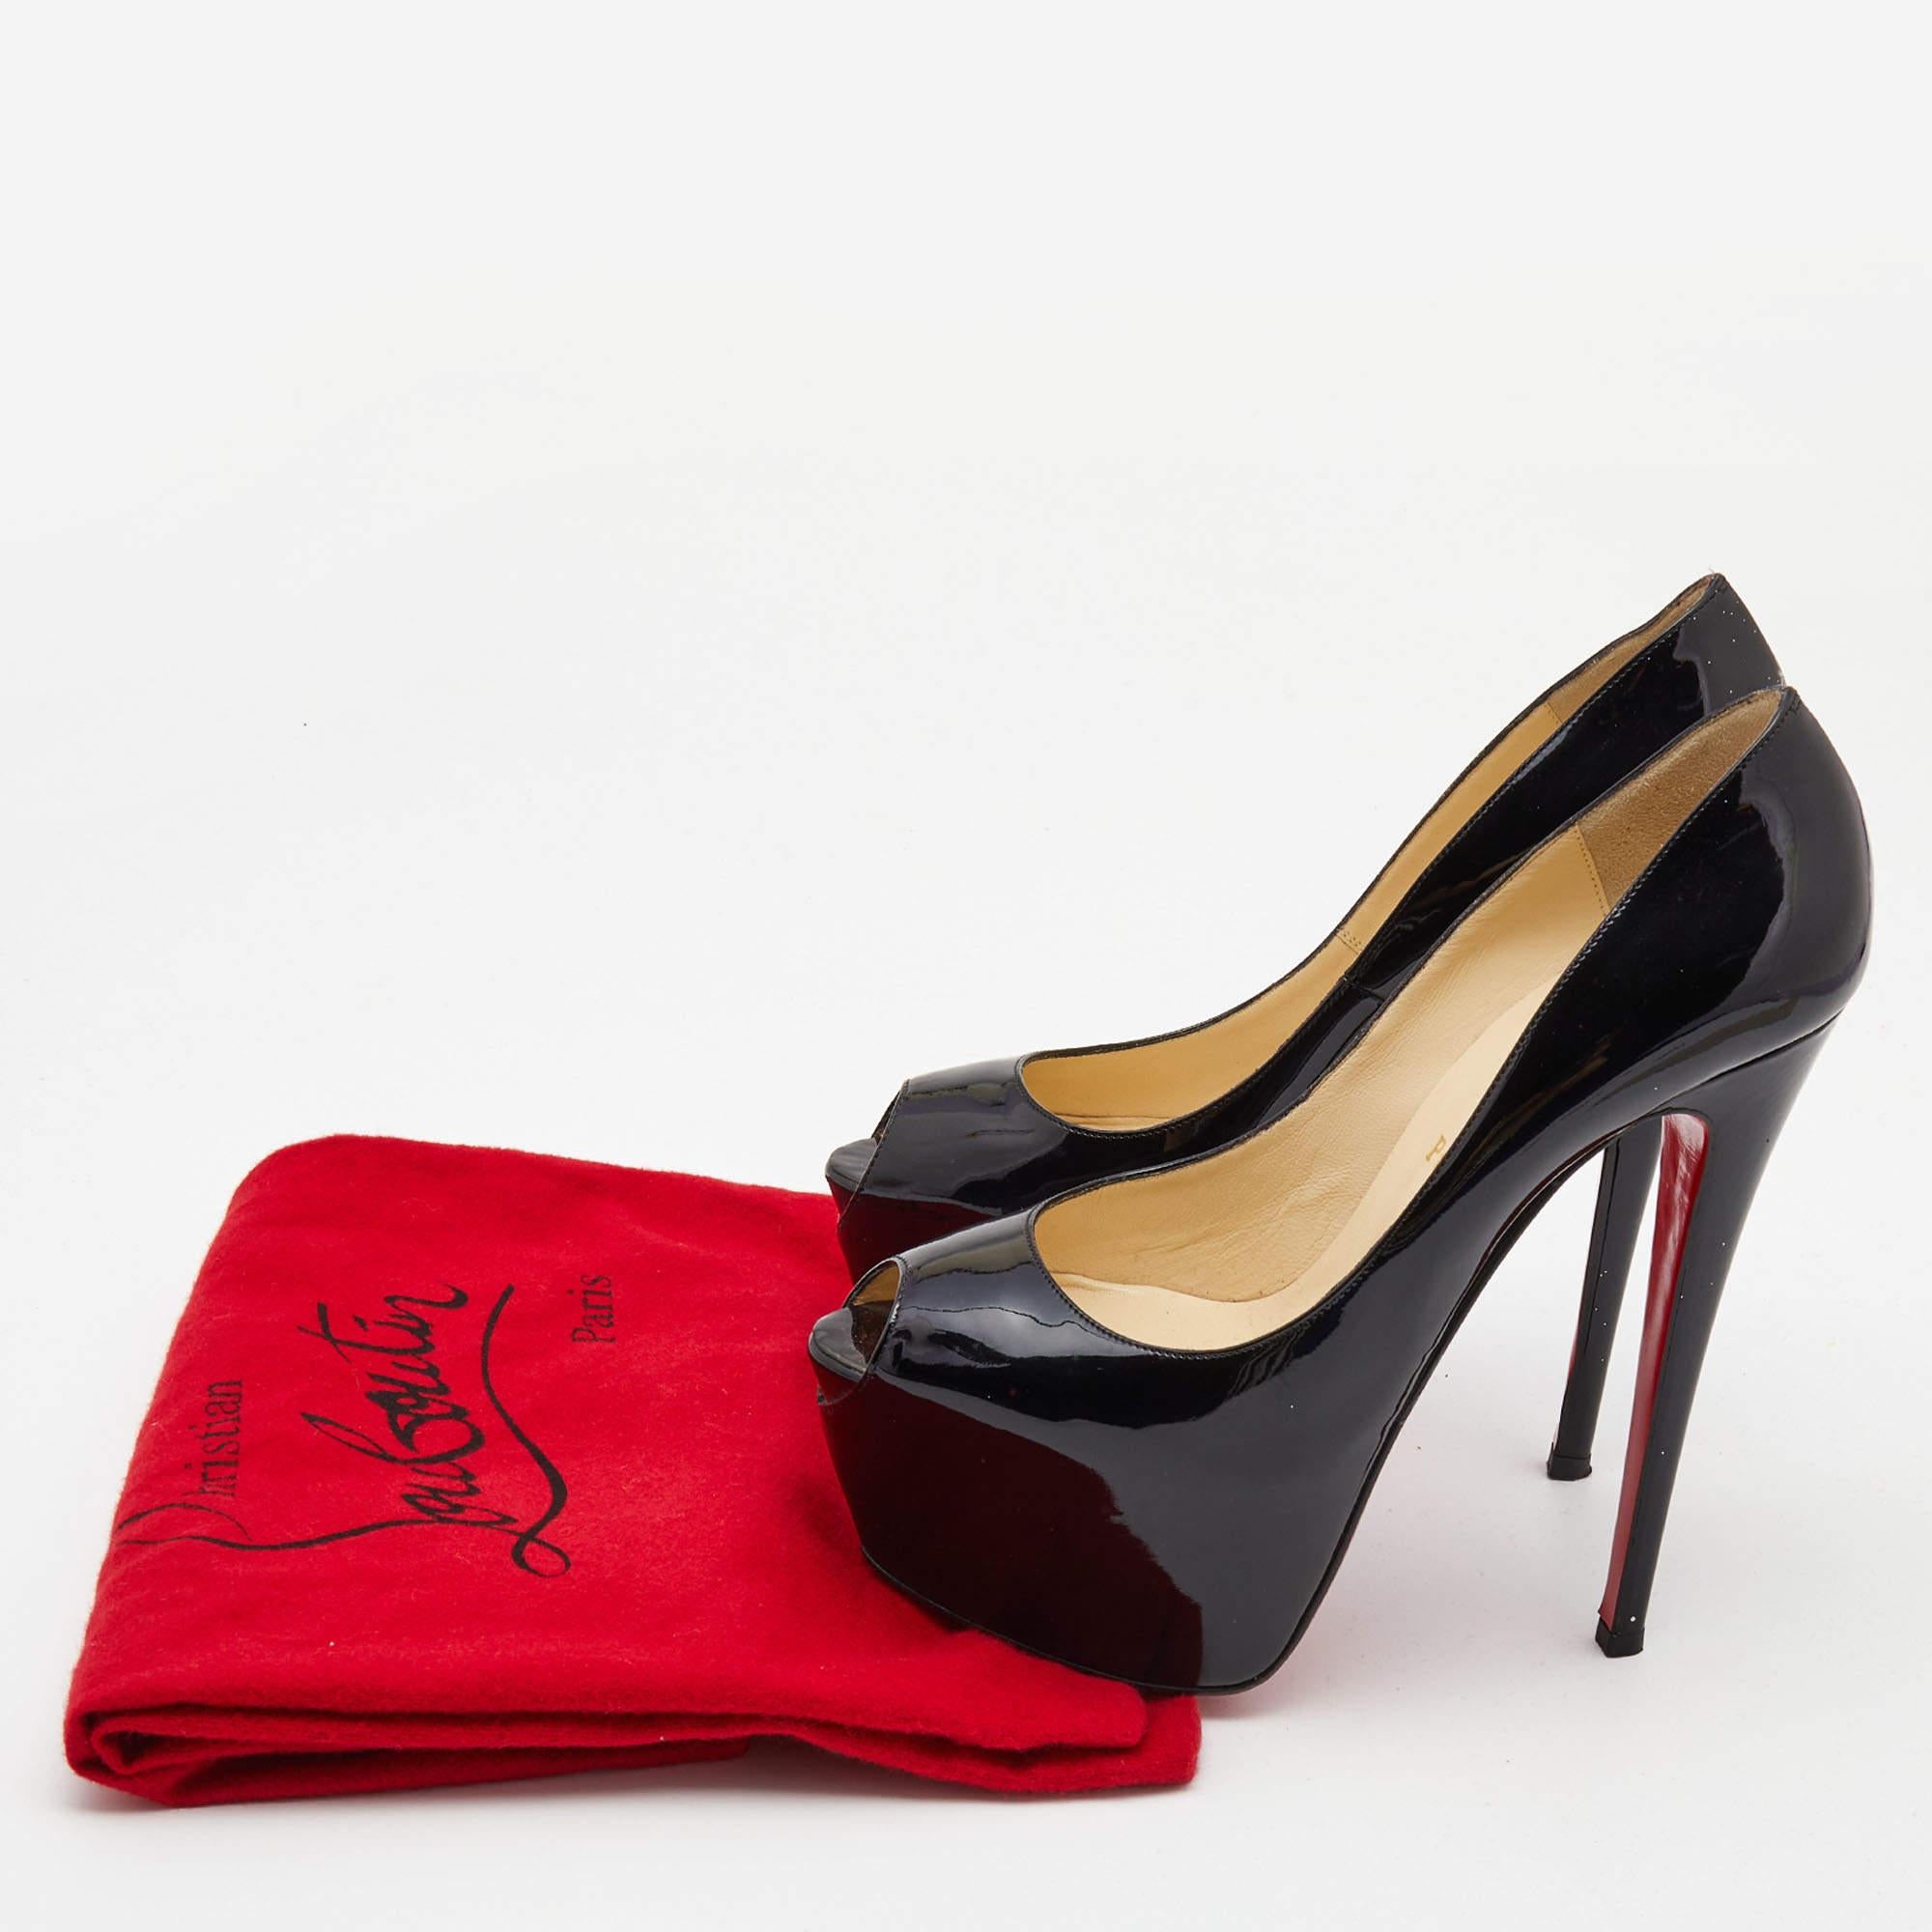 Christian Louboutin Black Patent Leather Highness Pumps Size 39.5 6